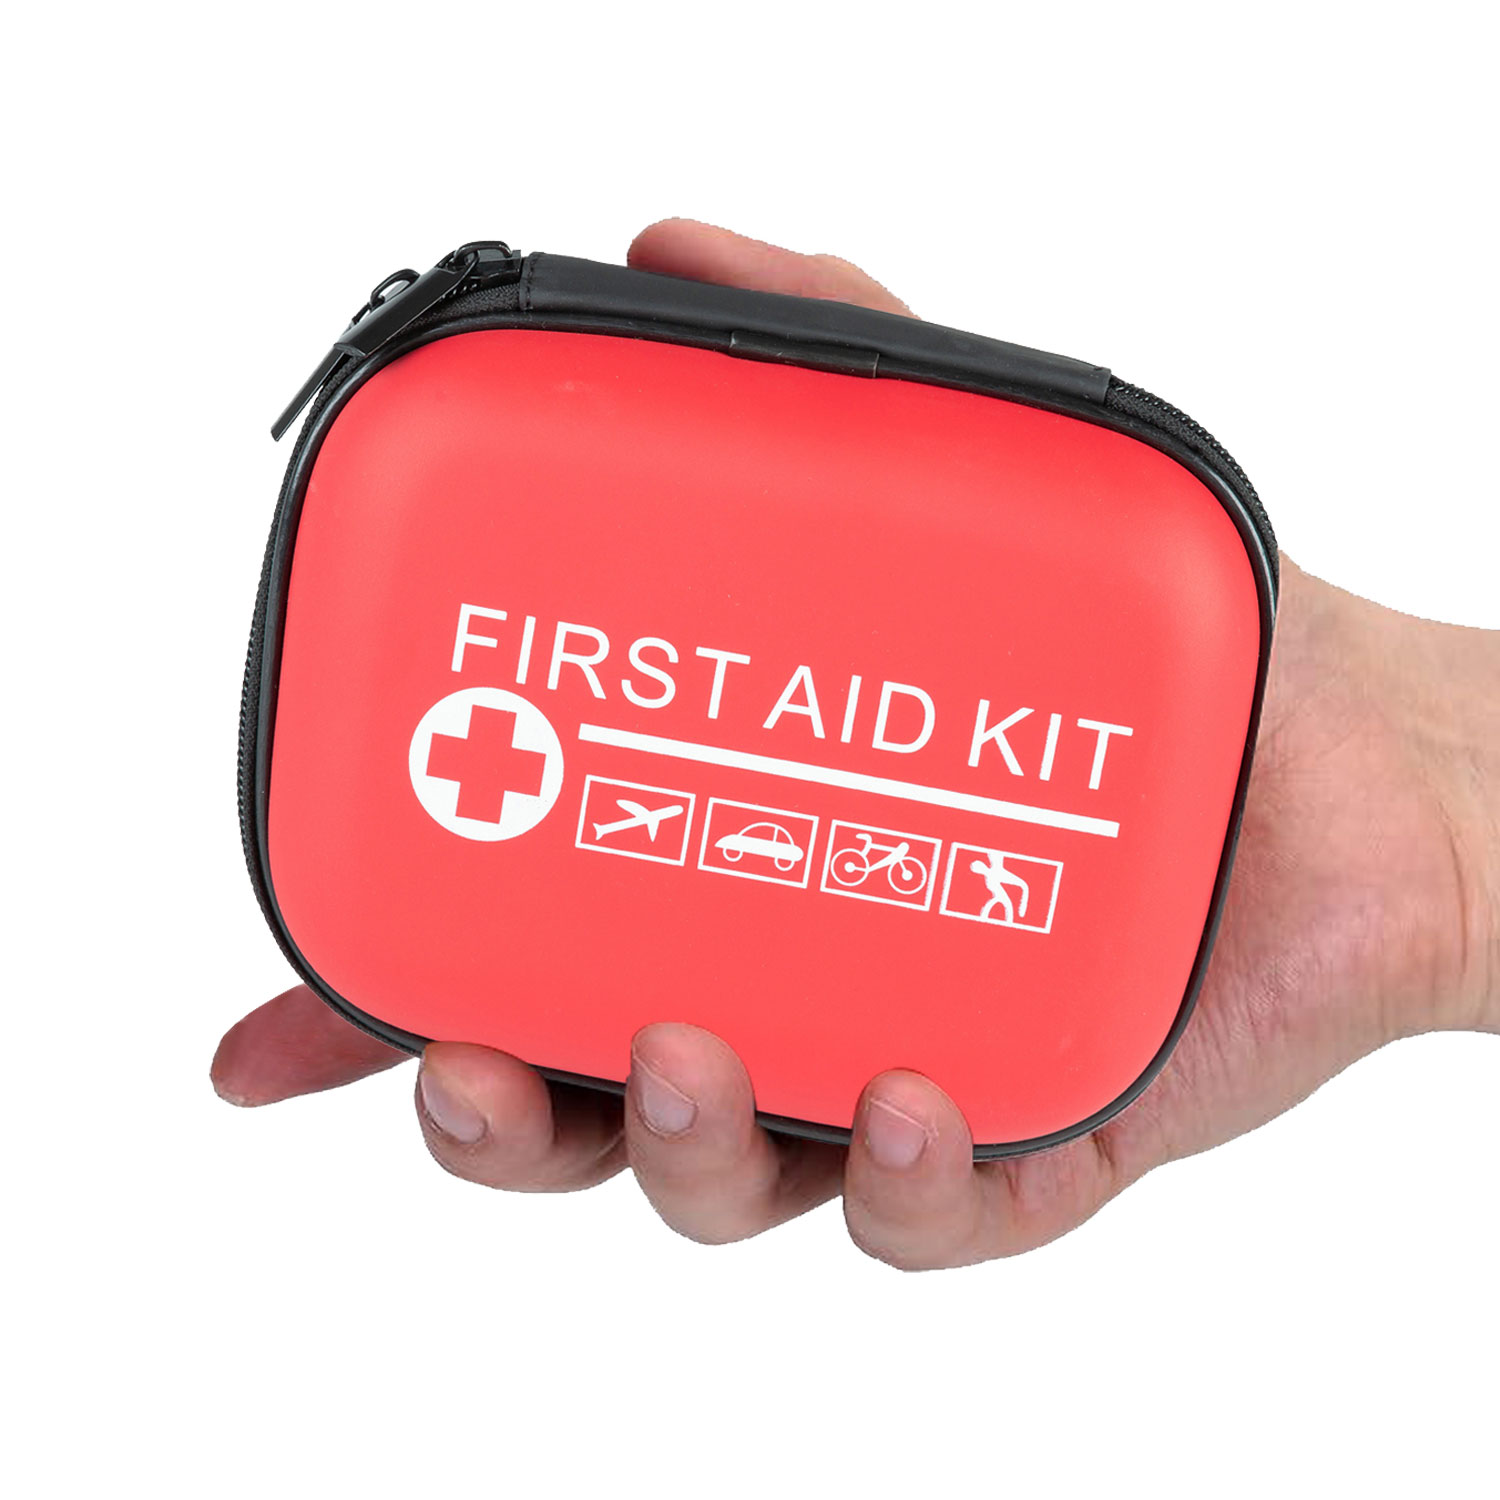 Addition of personal first aid kits